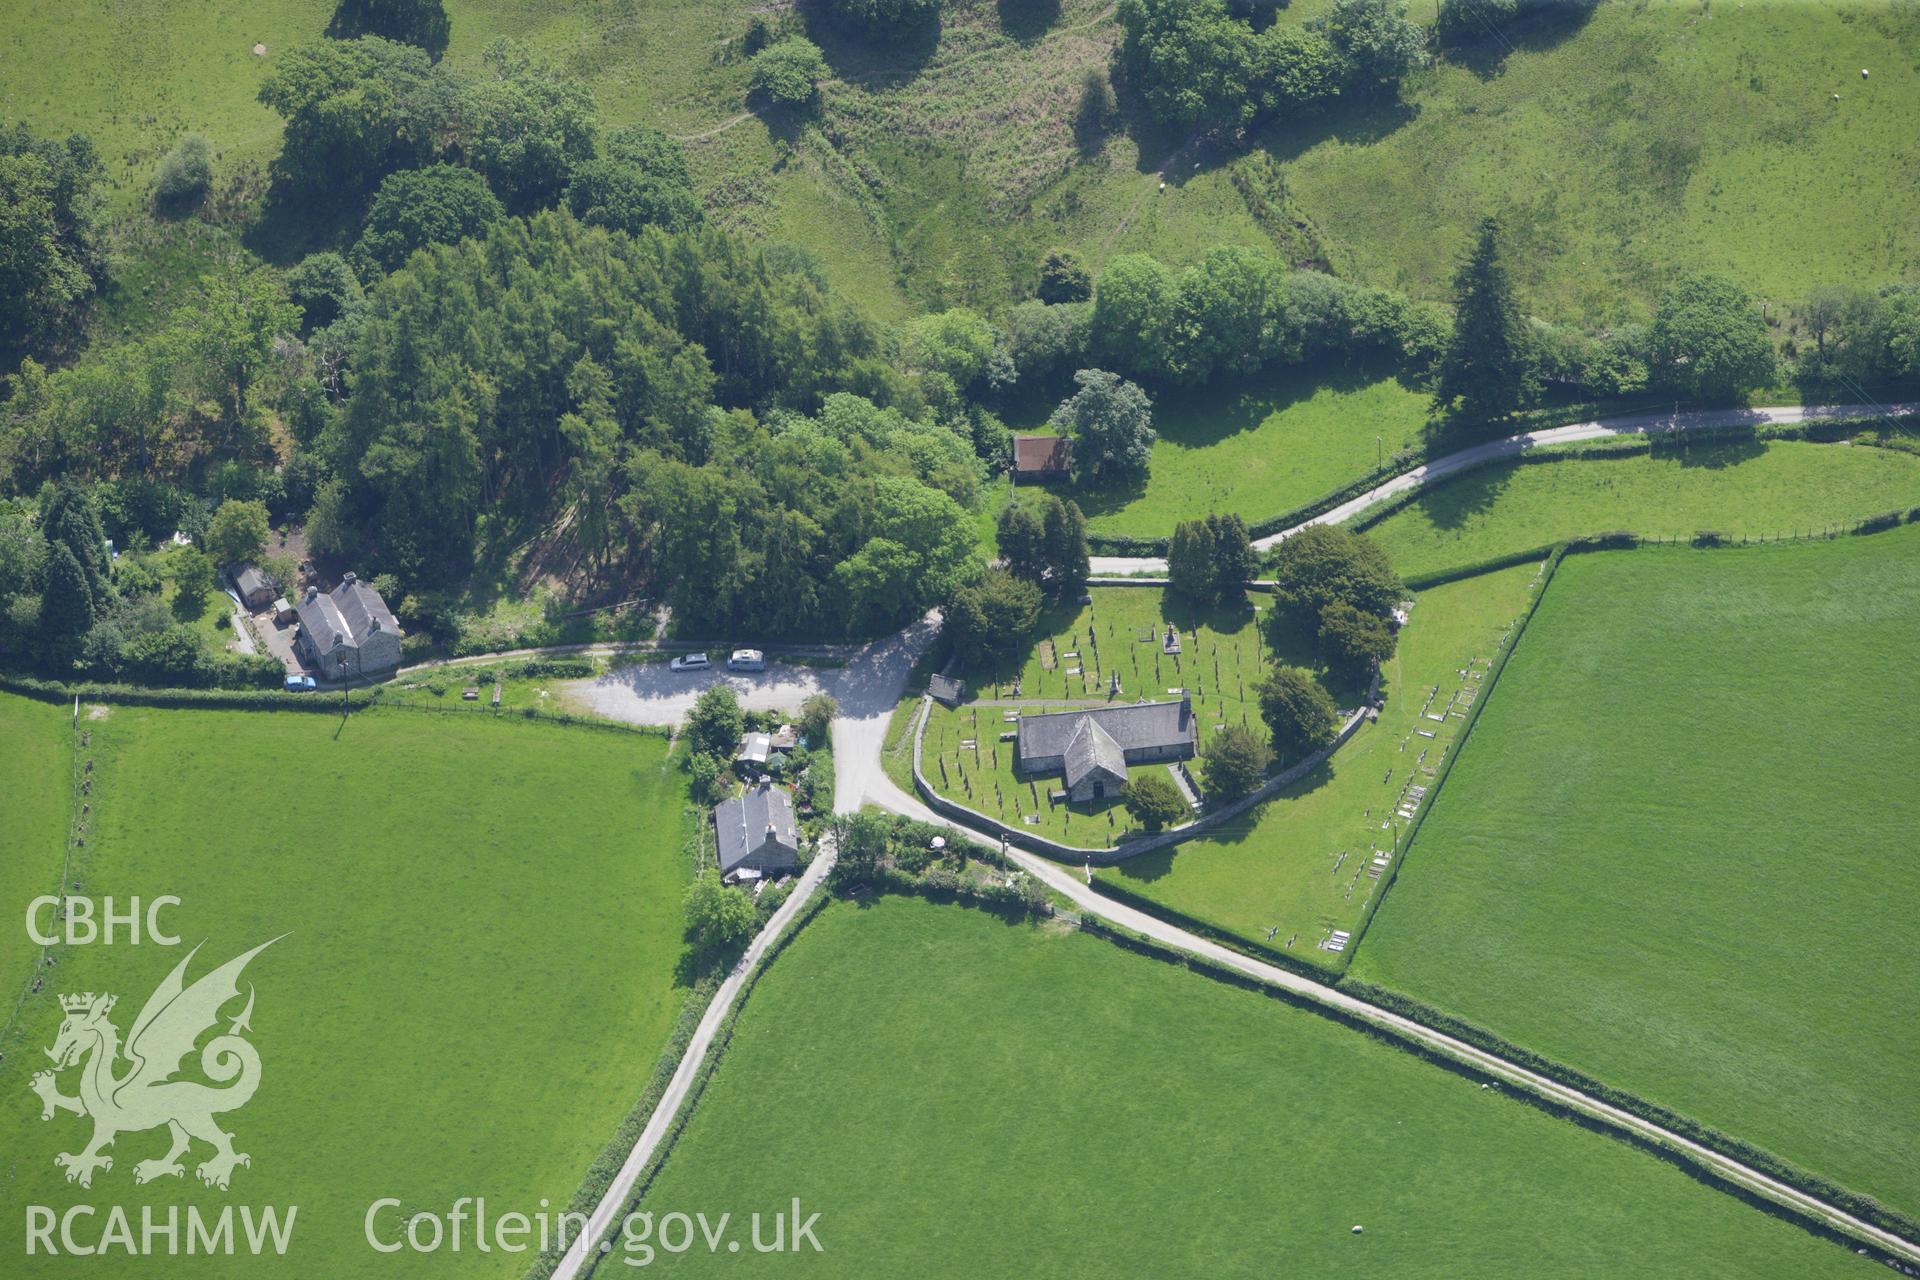 RCAHMW colour oblique aerial photograph of St Michaels Church, Llanfihangel-y-Pennant. Taken on 02 June 2009 by Toby Driver